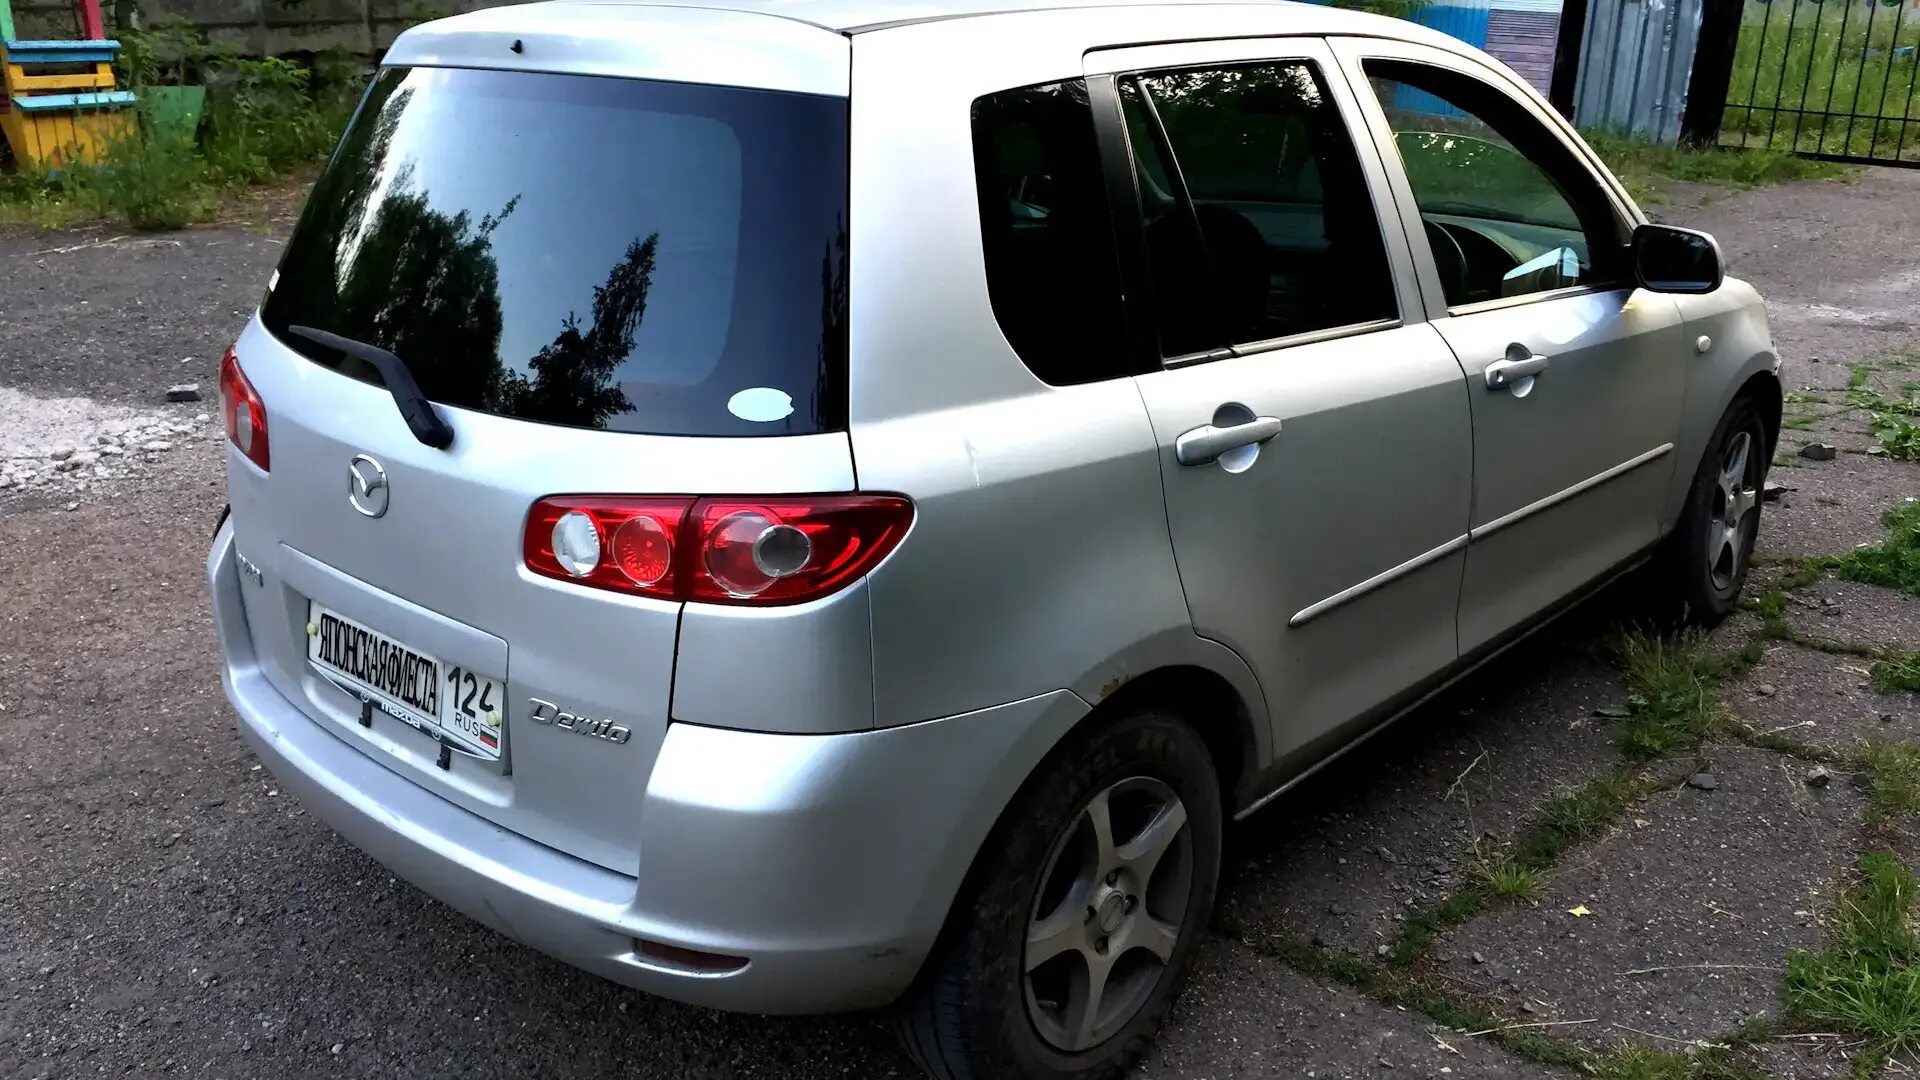 Mazda dy. Мазда Демио dy3w. Мазда Демио dy3w 2003. Мазда Демио dy3w 2002. Мазда Демио 2003 1.3.